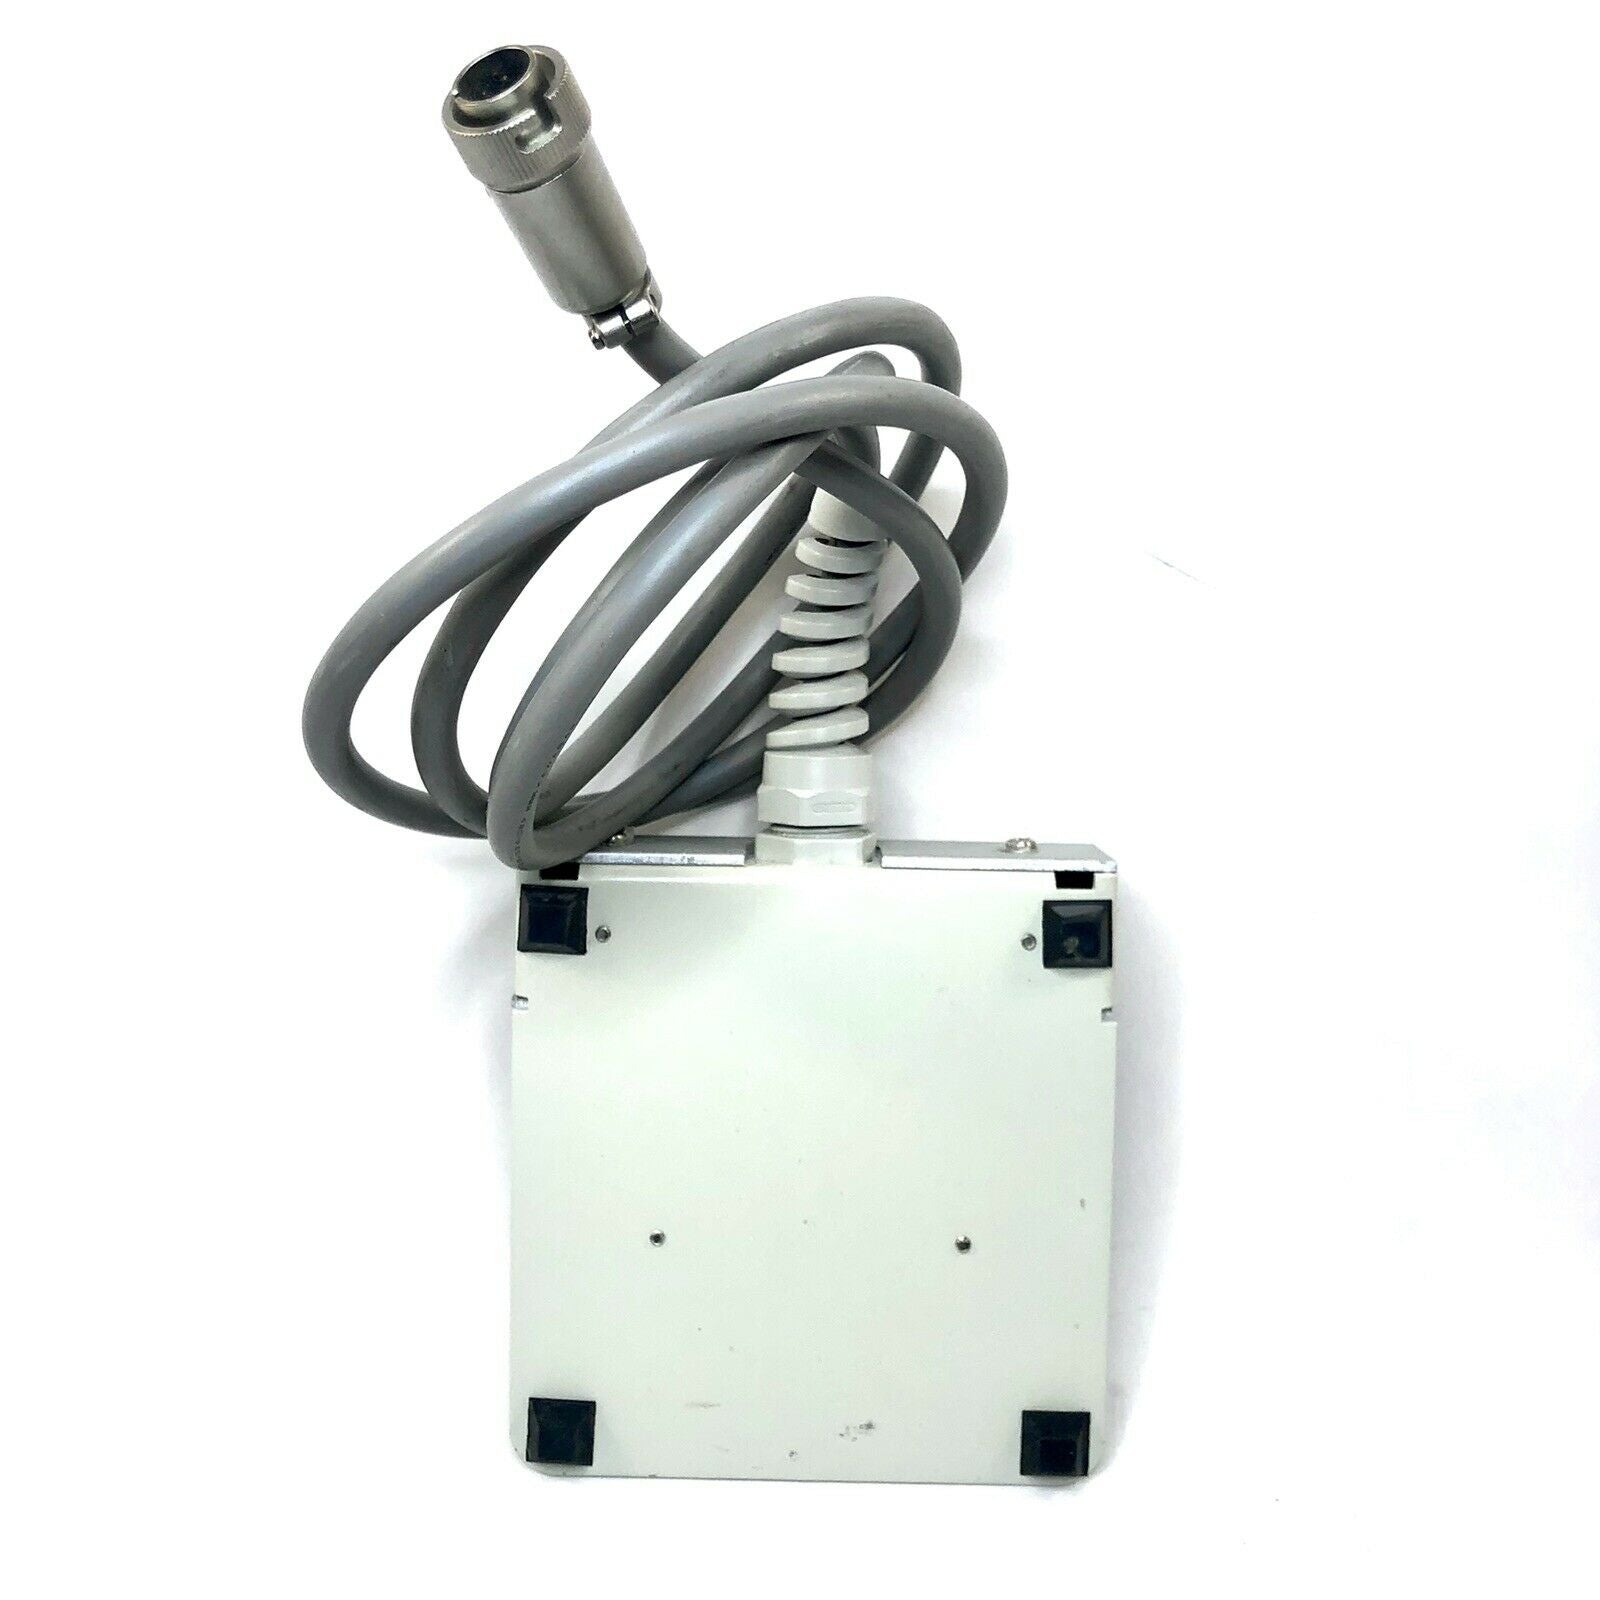 Freeze Foot Switch Pedal for GE Ultrasound Machine - Tested - SHIPS FREE! DIAGNOSTIC ULTRASOUND MACHINES FOR SALE